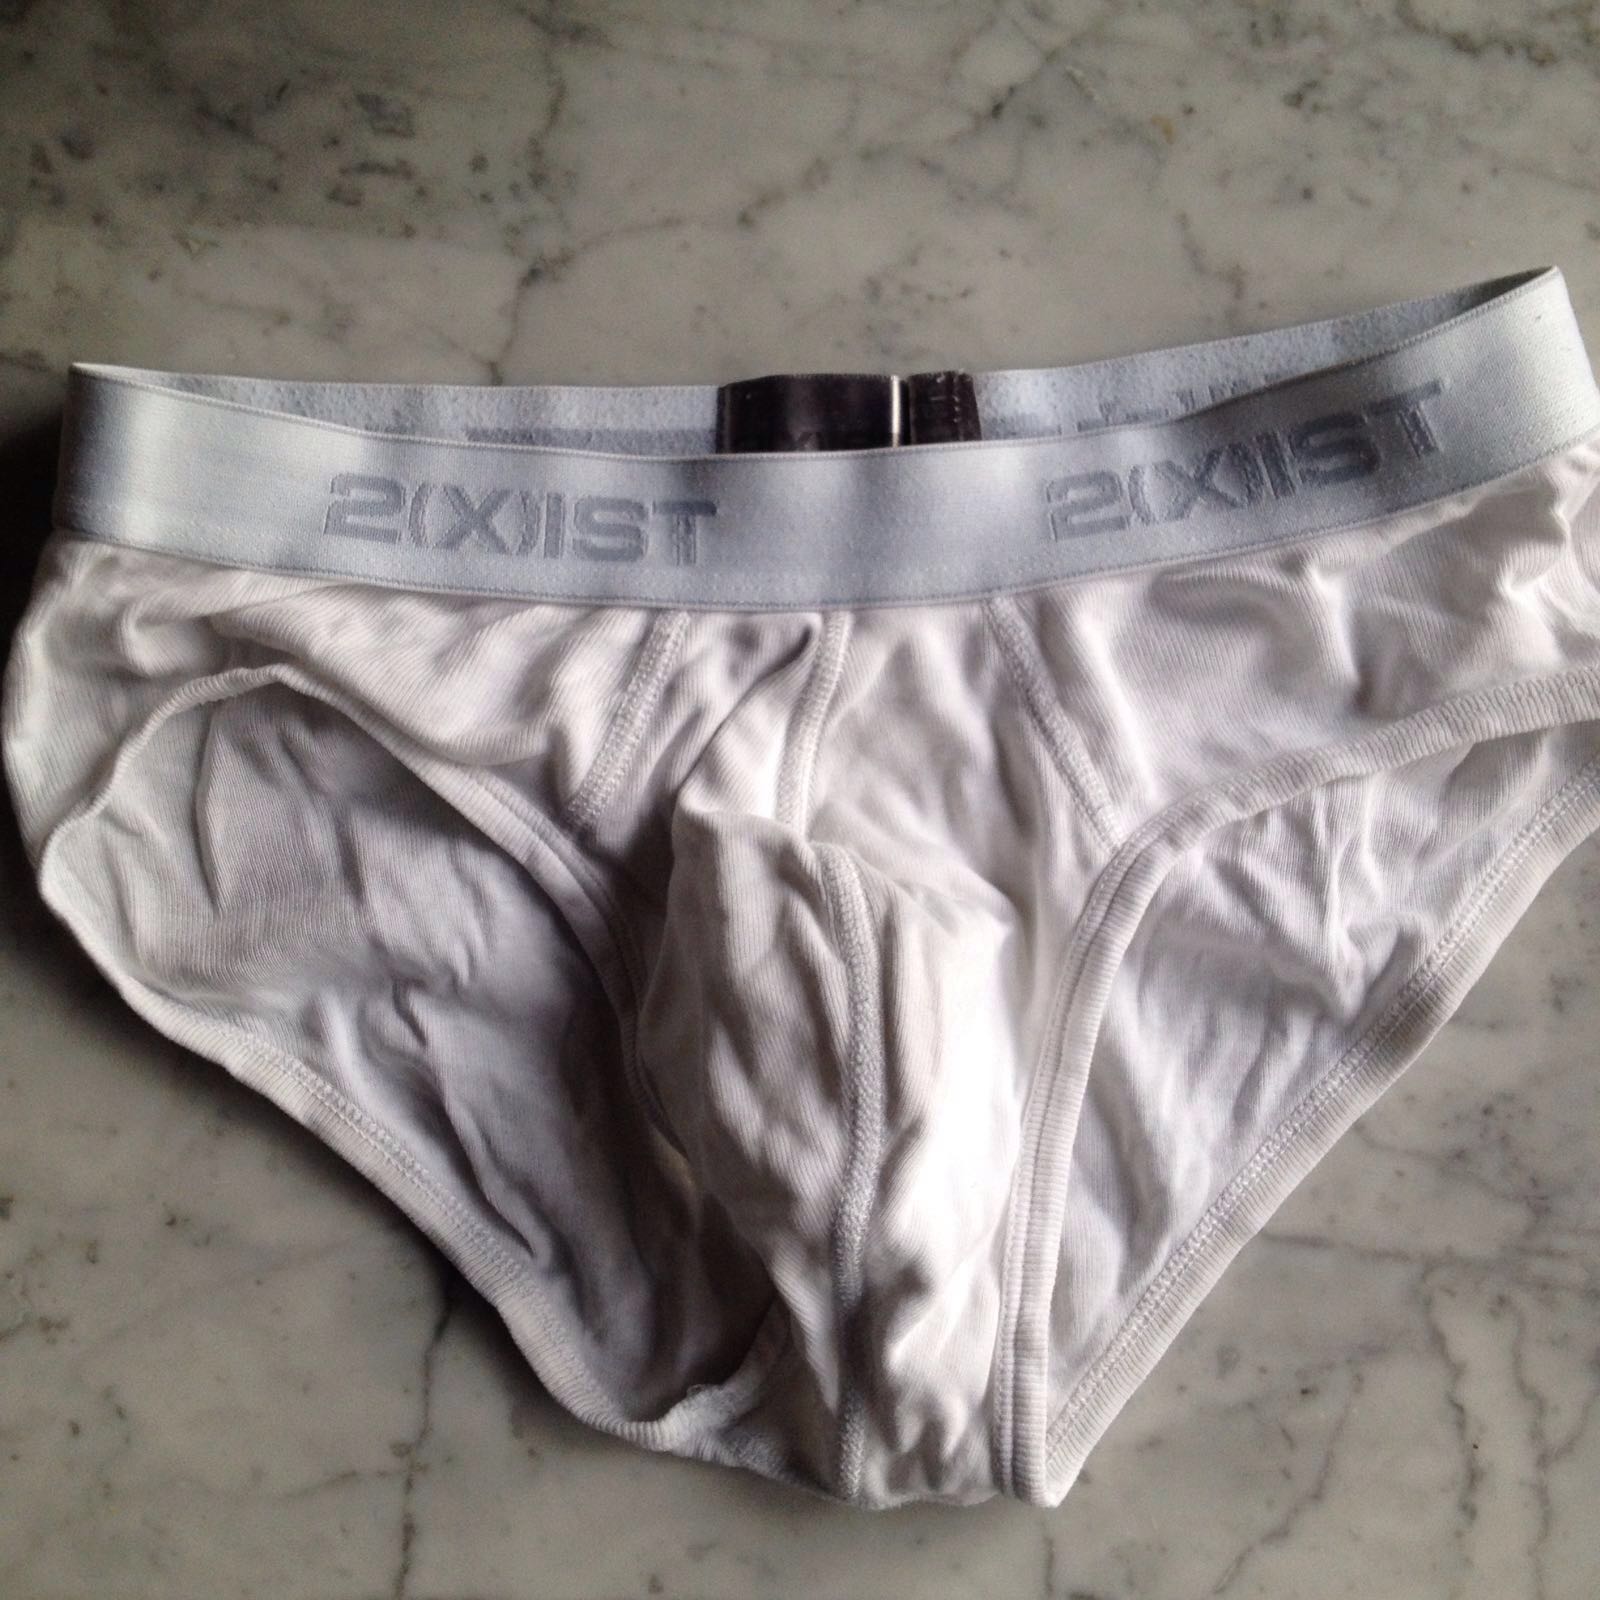 Marks briefs on X: Used briefs for sale. Can be customised